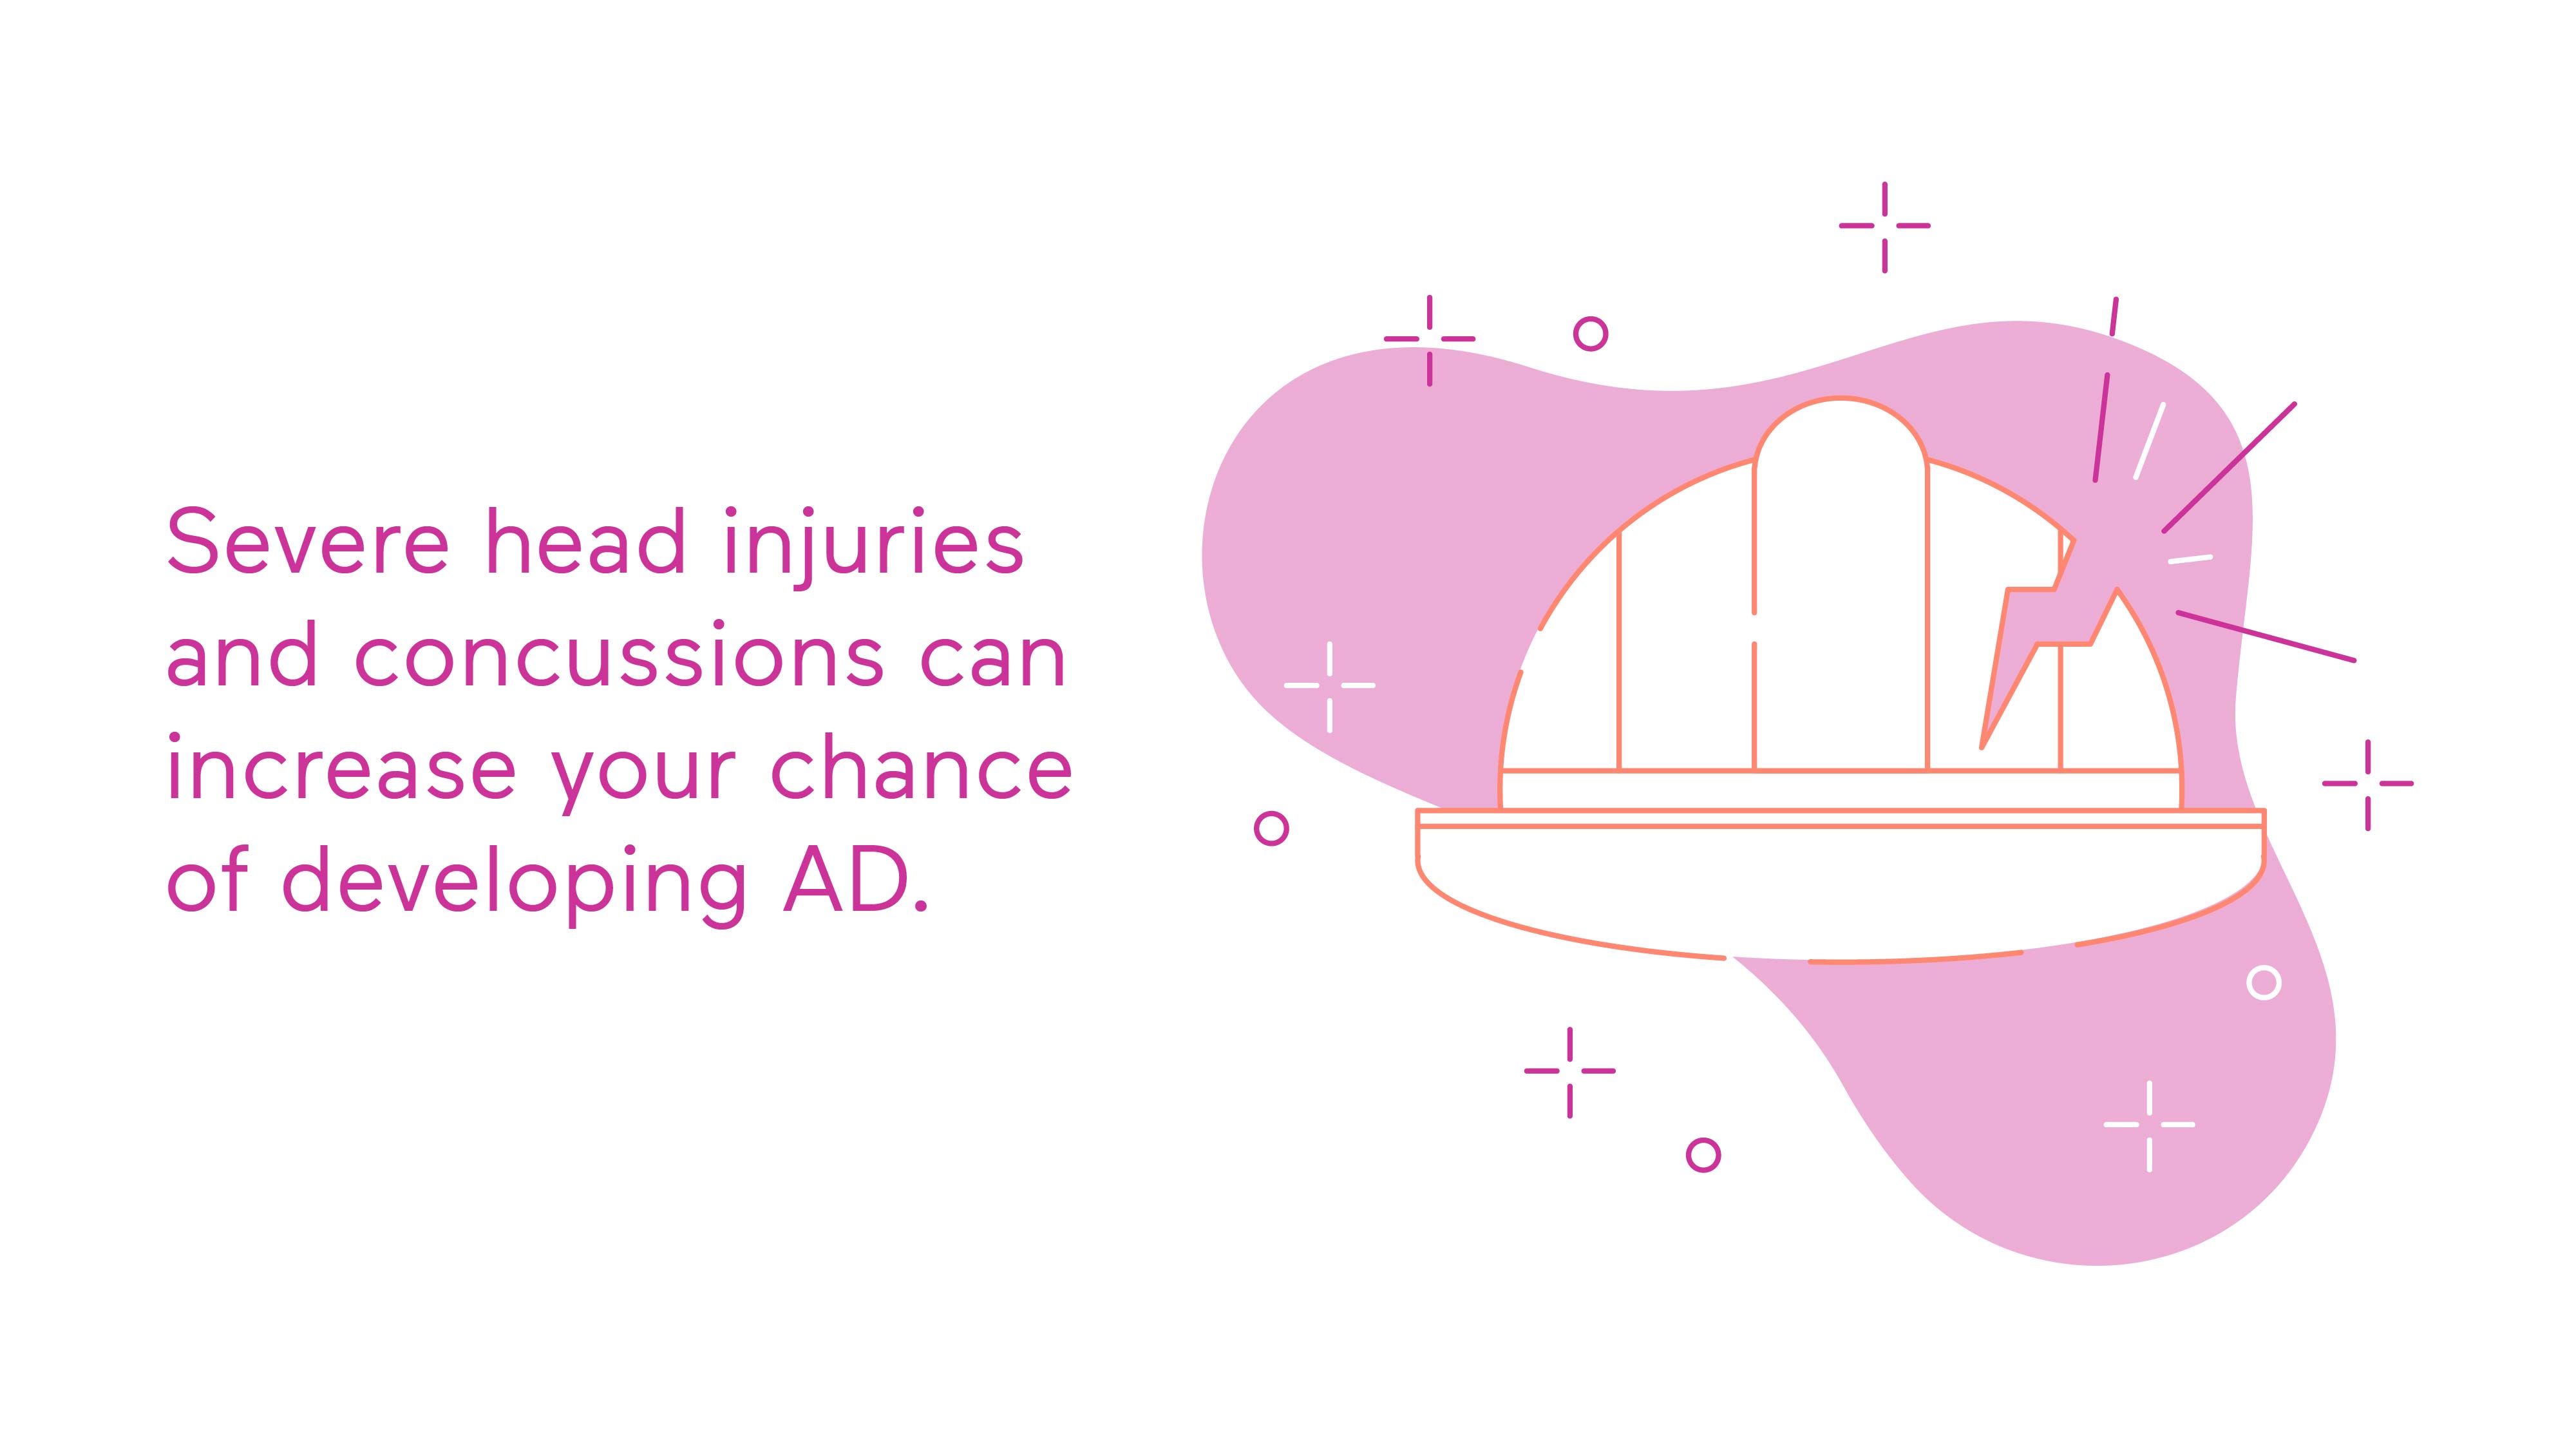 Head Injuries and Concussion Can Increase Chance of Developing AD